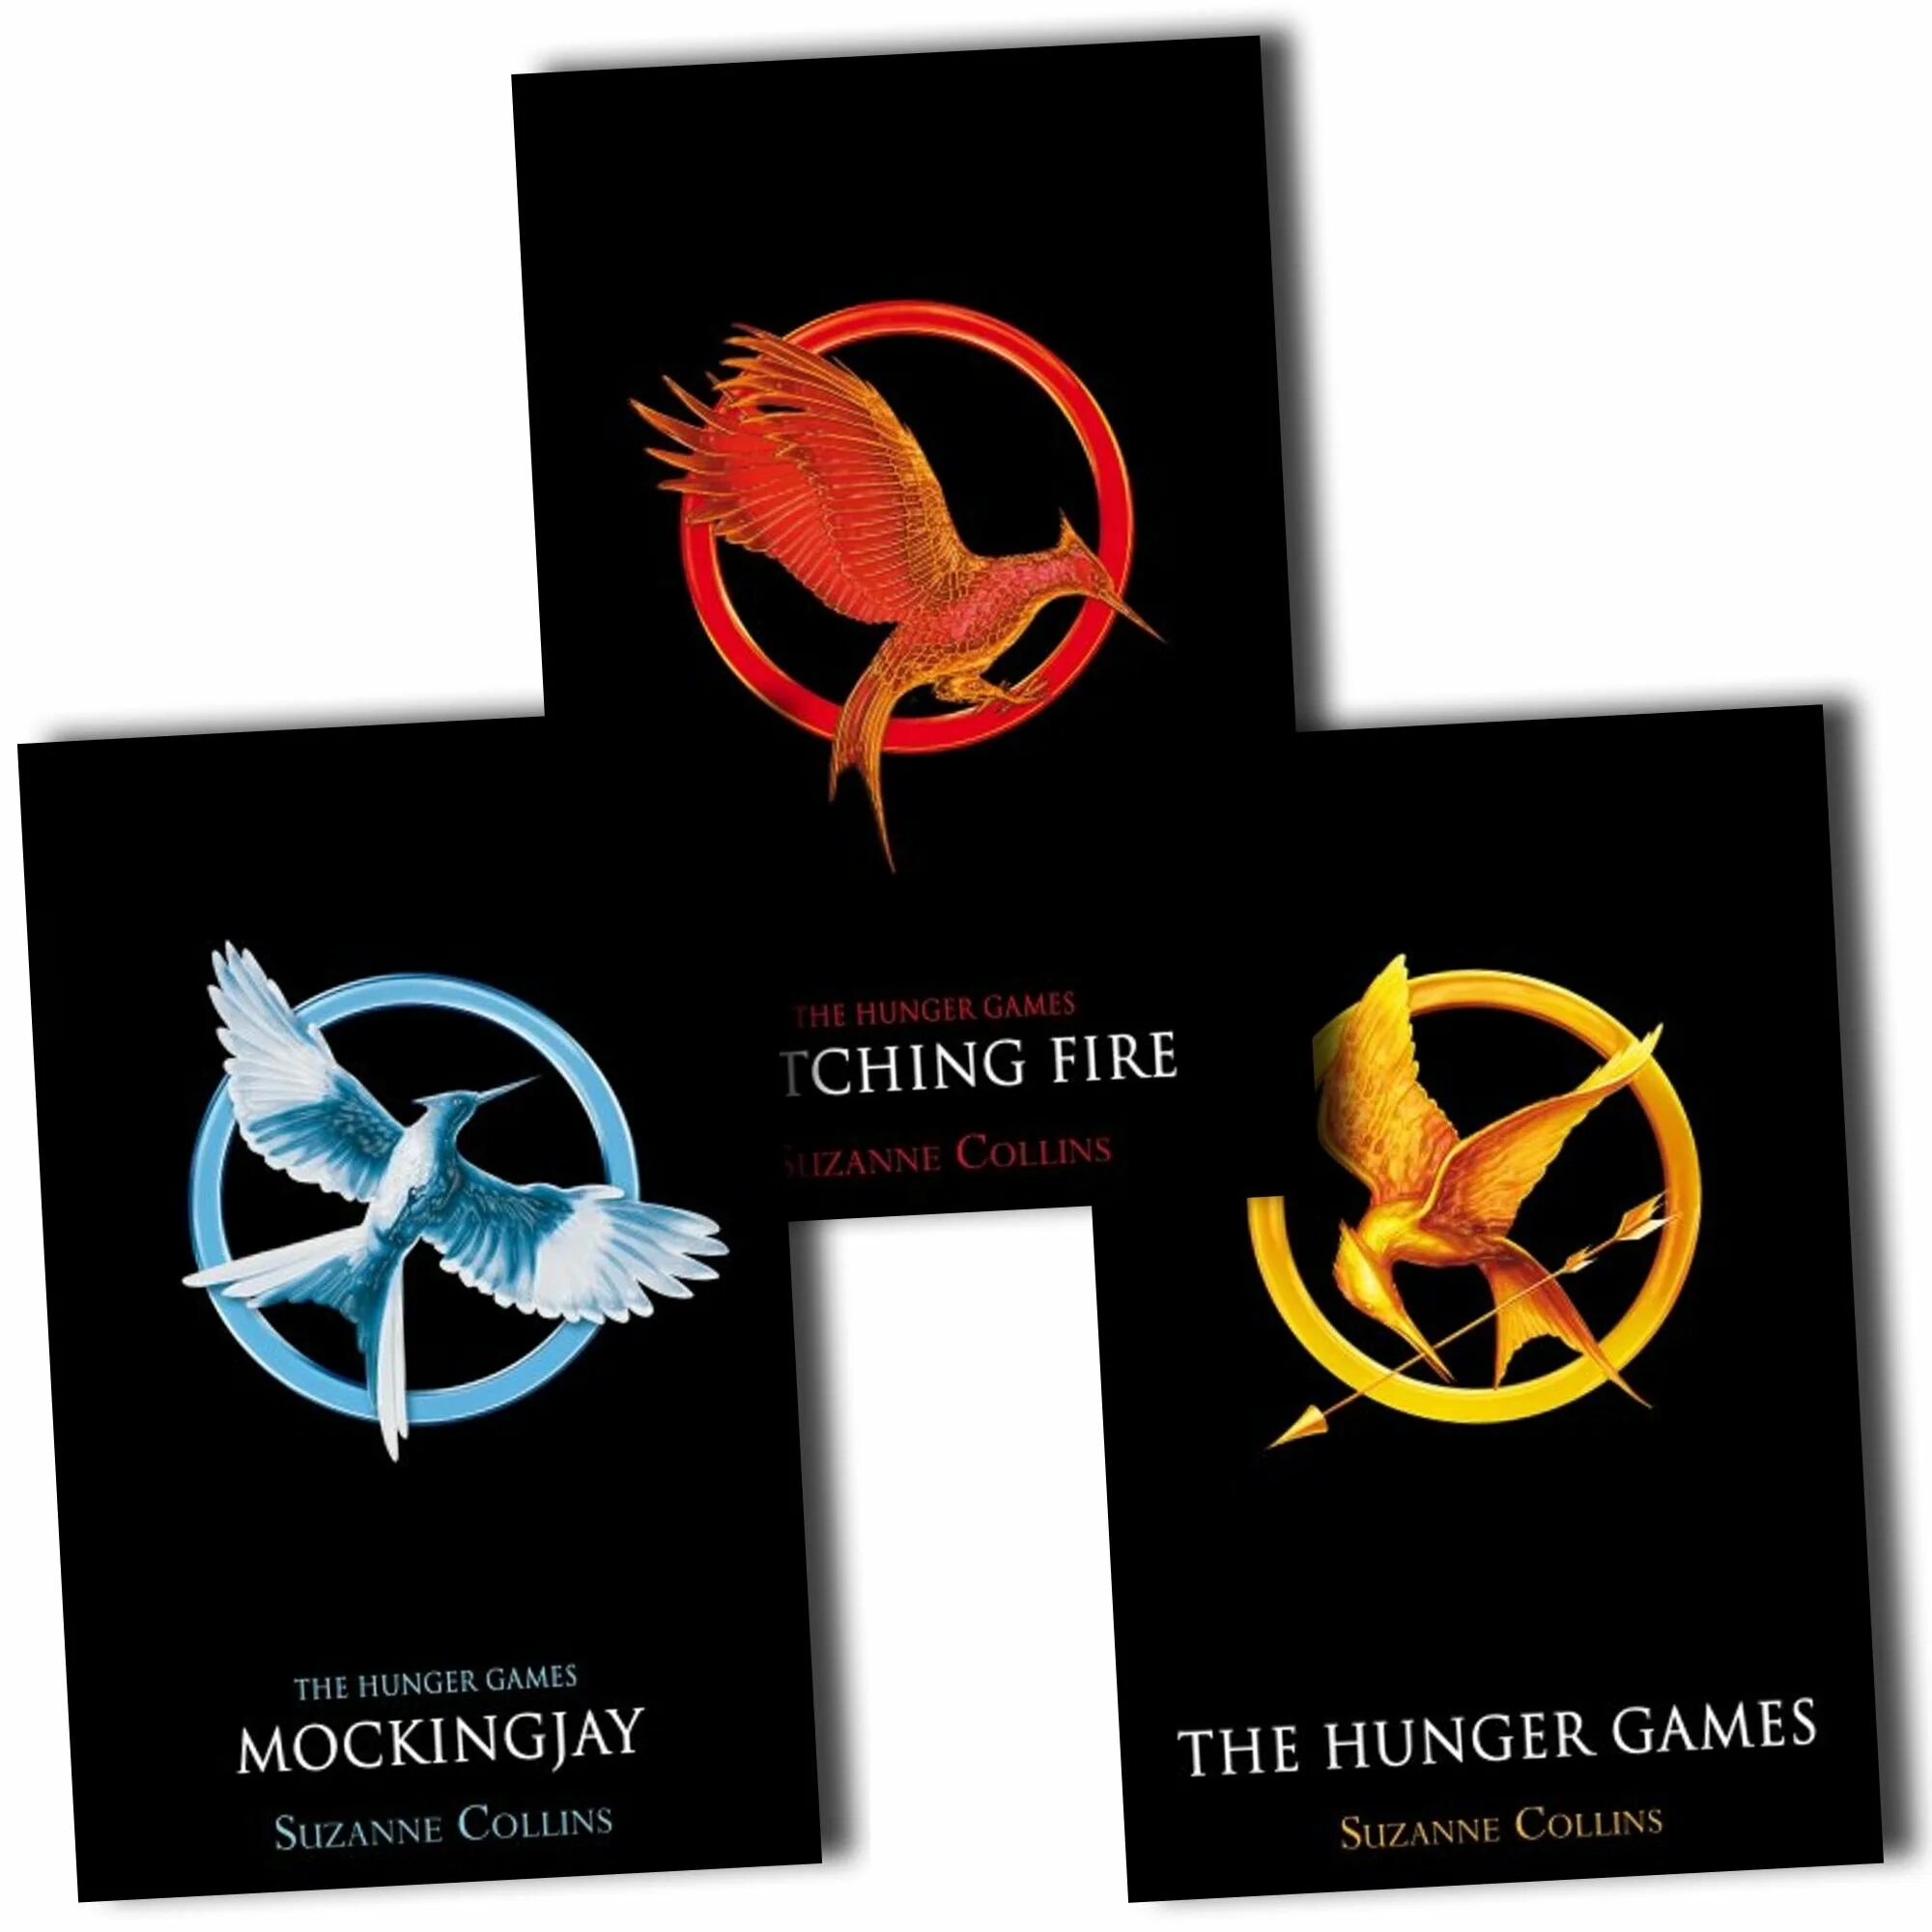 Collins Suzanne "Hunger games". Hunger games book